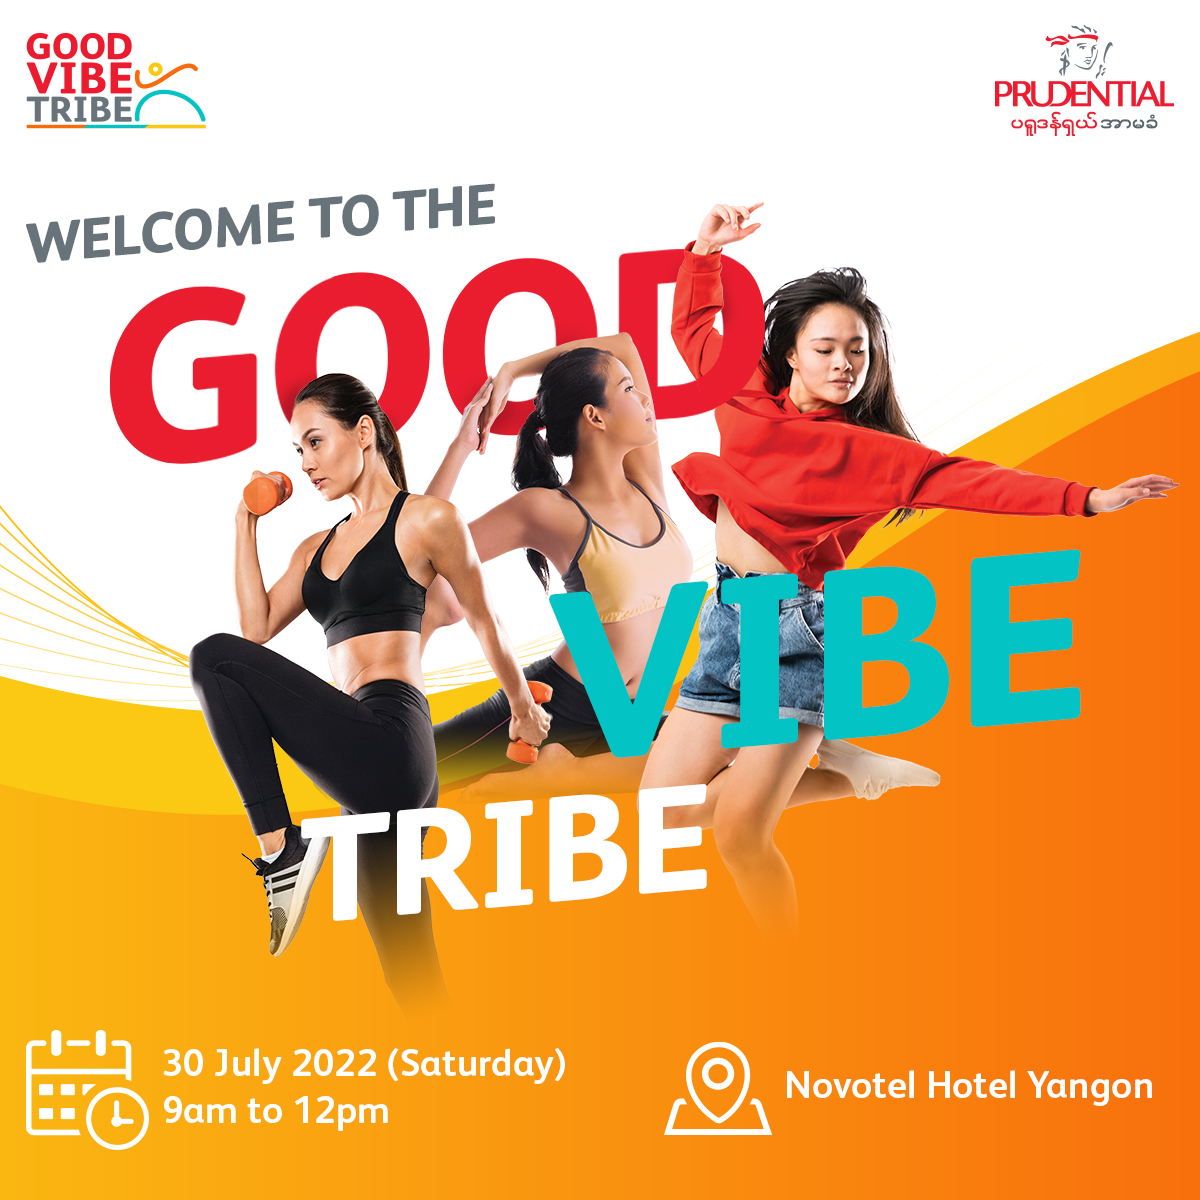 Event_Information_Good_Vibe_Tribe_Festival_by_Prudential_Myanmar_Credit_to_Prudential_Myanmar.jpg